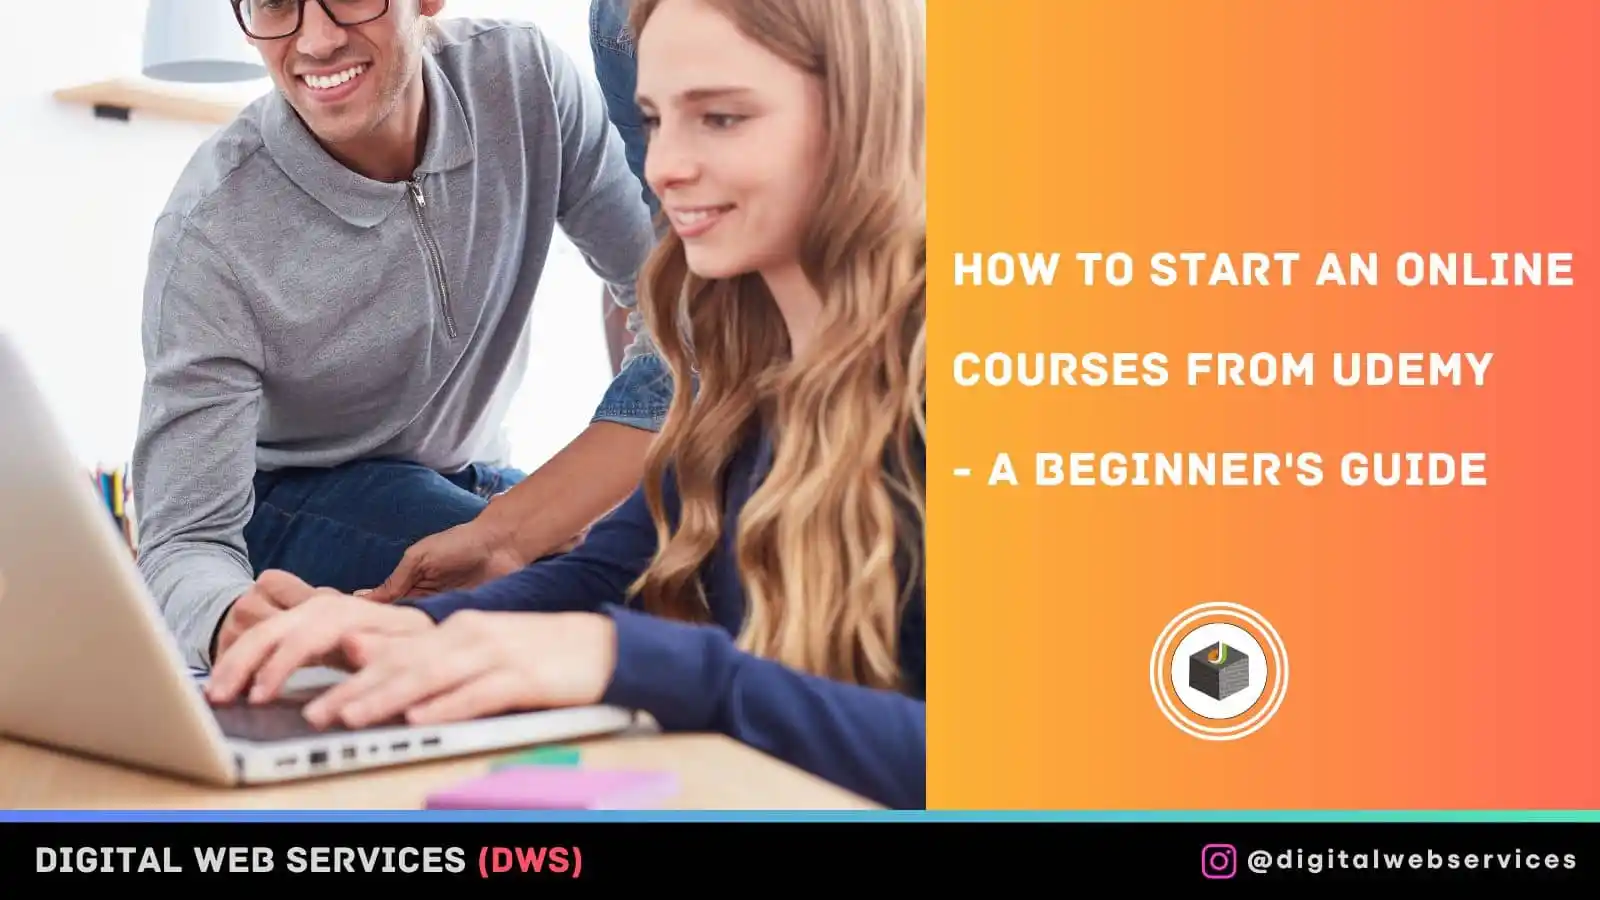 How to Start an Online Courses From Udemy - A Beginner's Guide